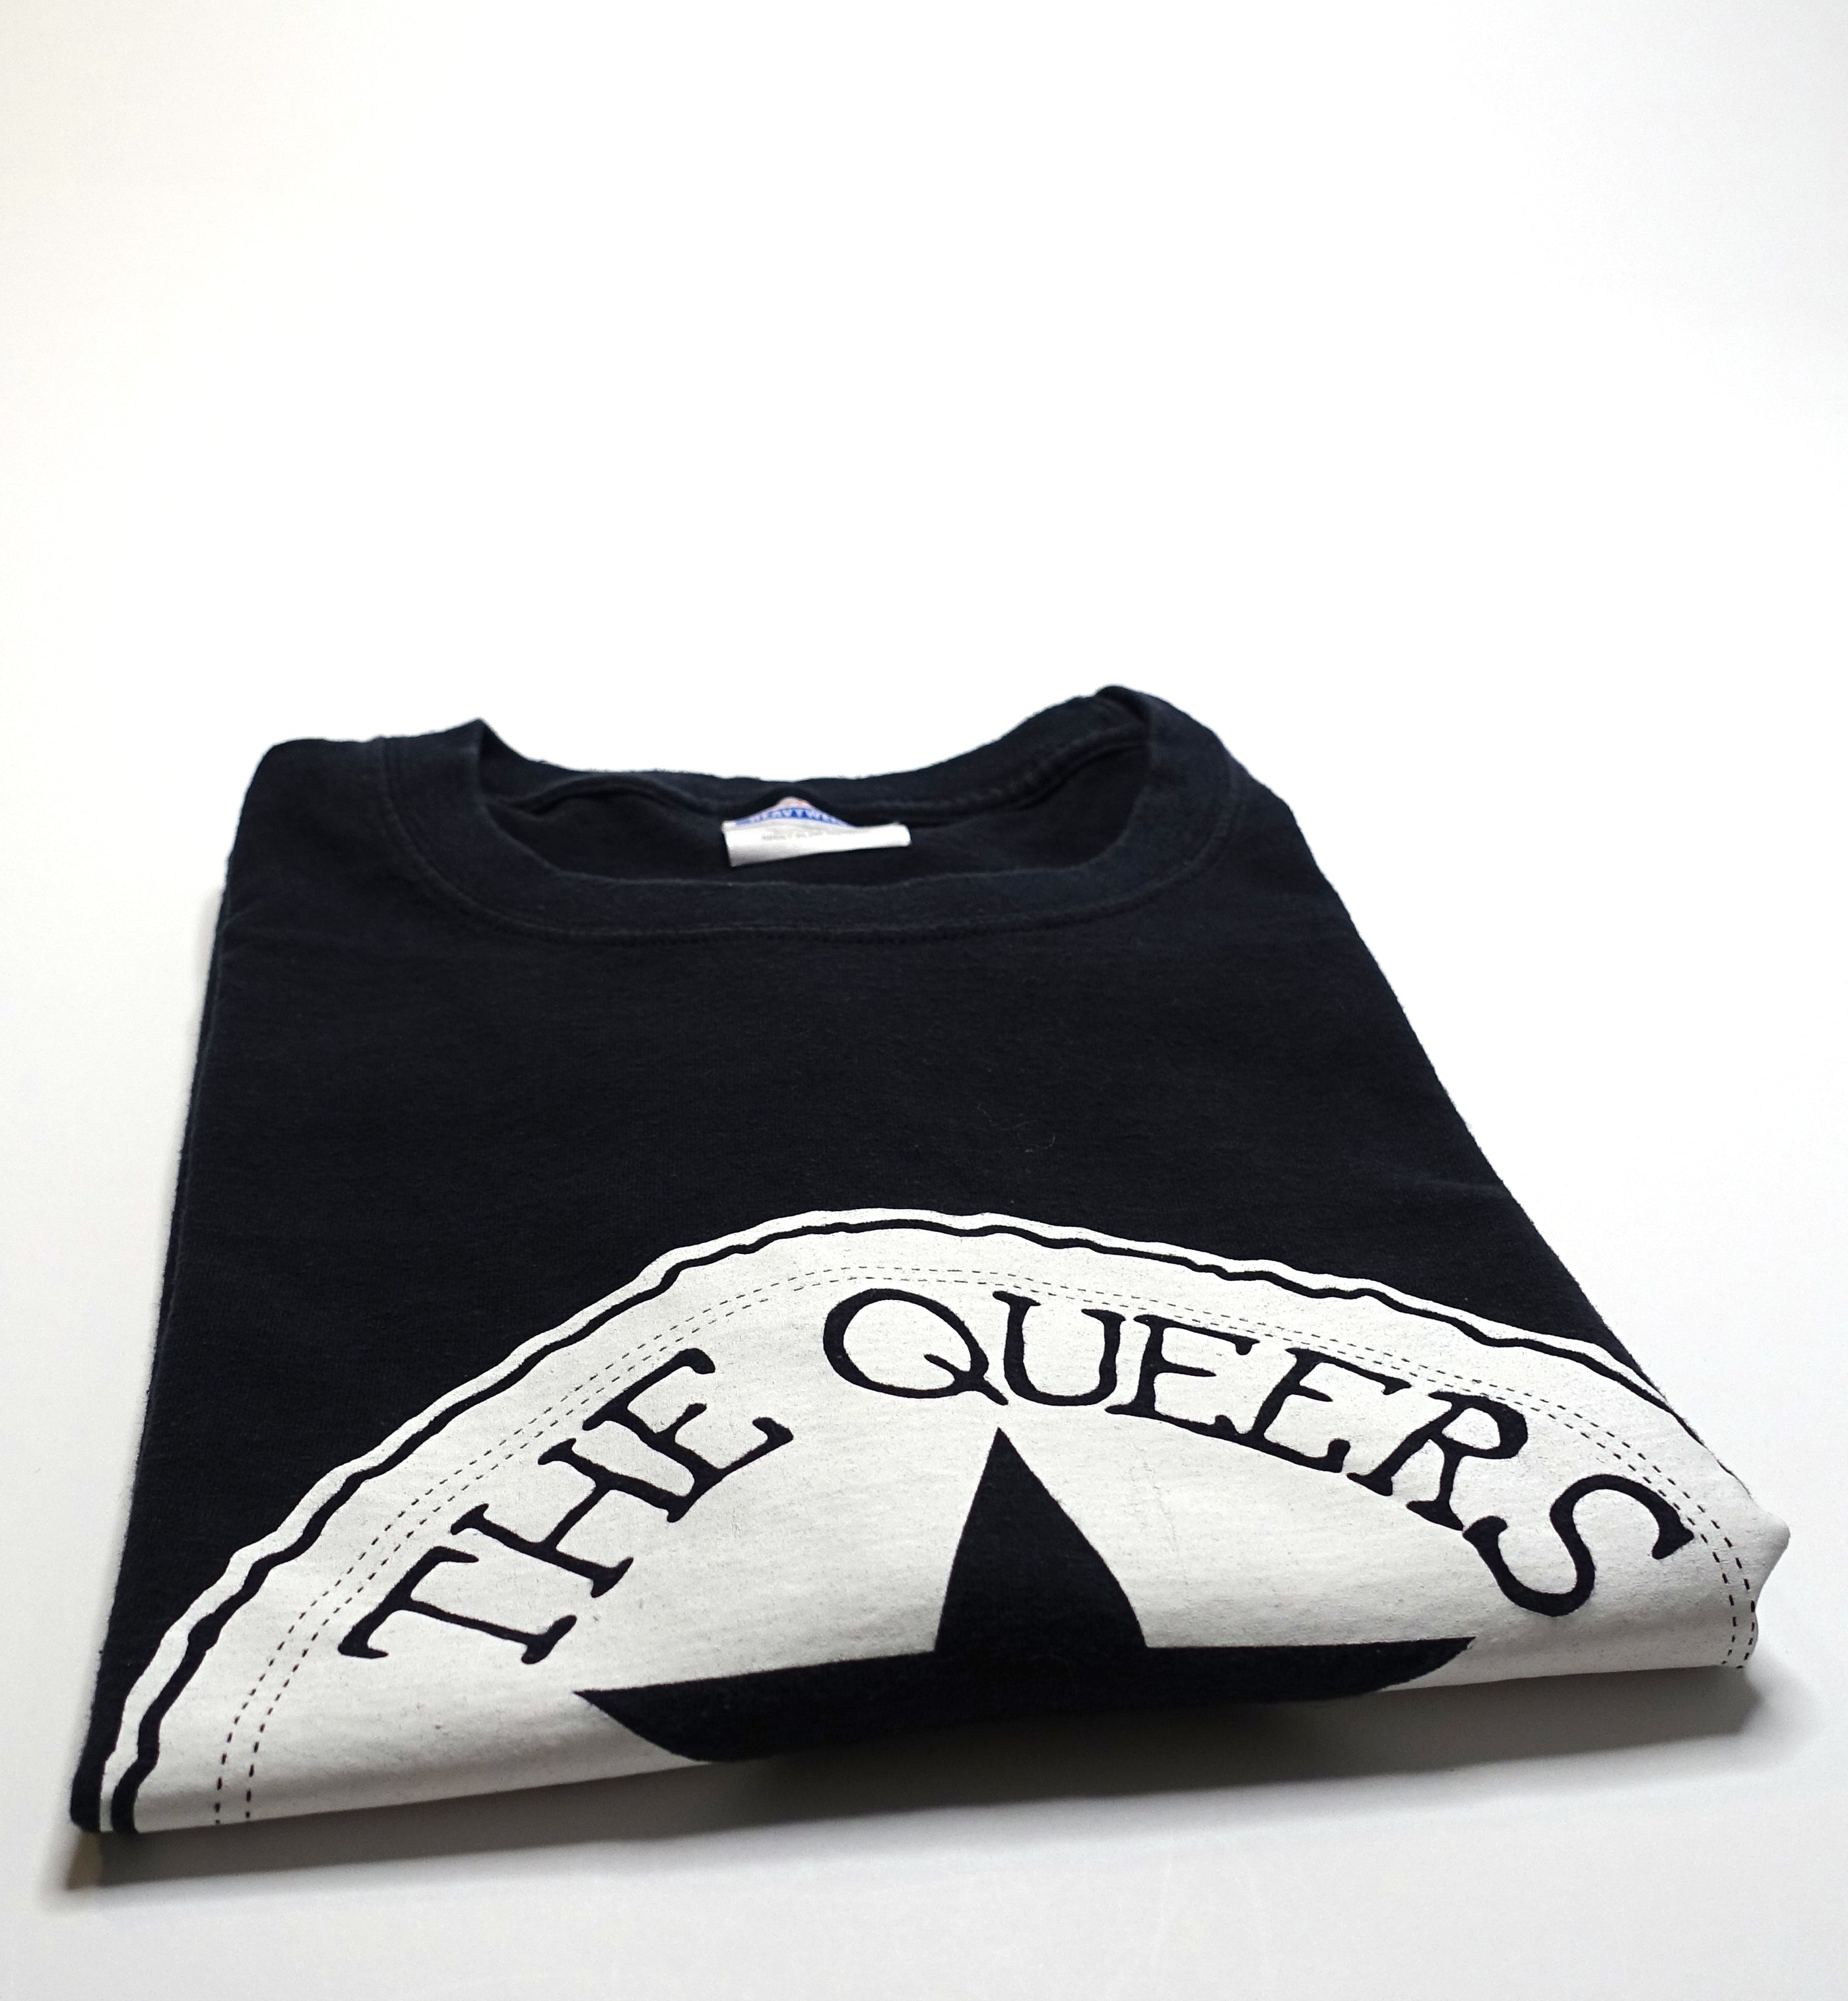 The Queers - Seeing, Hearing, Smelling, Tasting, Feeling Tour Shirt Size XL